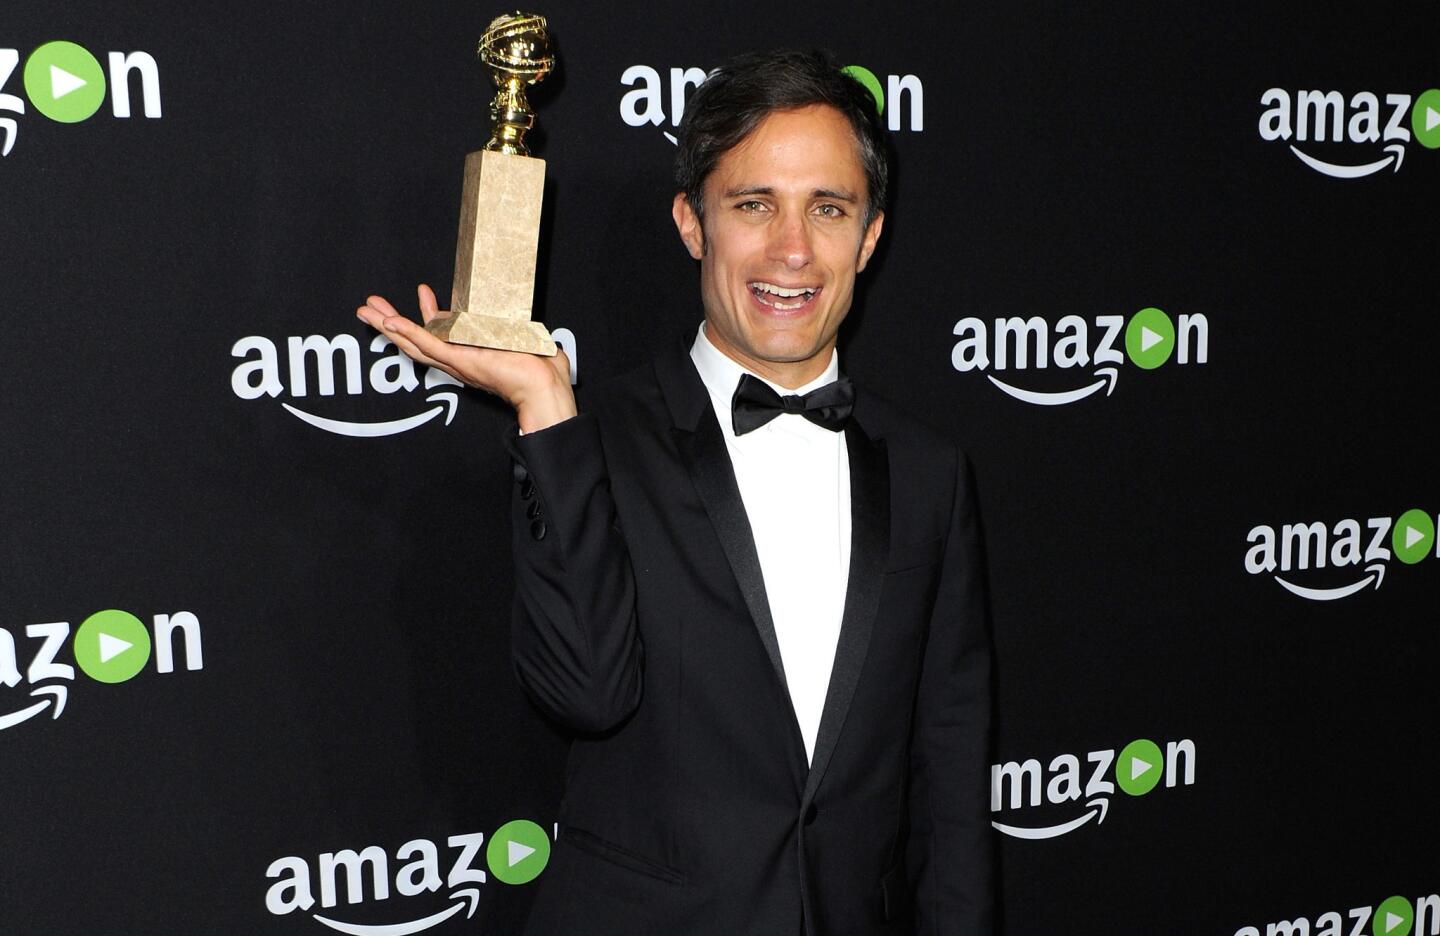 Gael Garcia Bernal, who won the Golden Globe for actor in a TV musical or comedy series for his role in "Mozart in the Jungle," at the Amazon party.